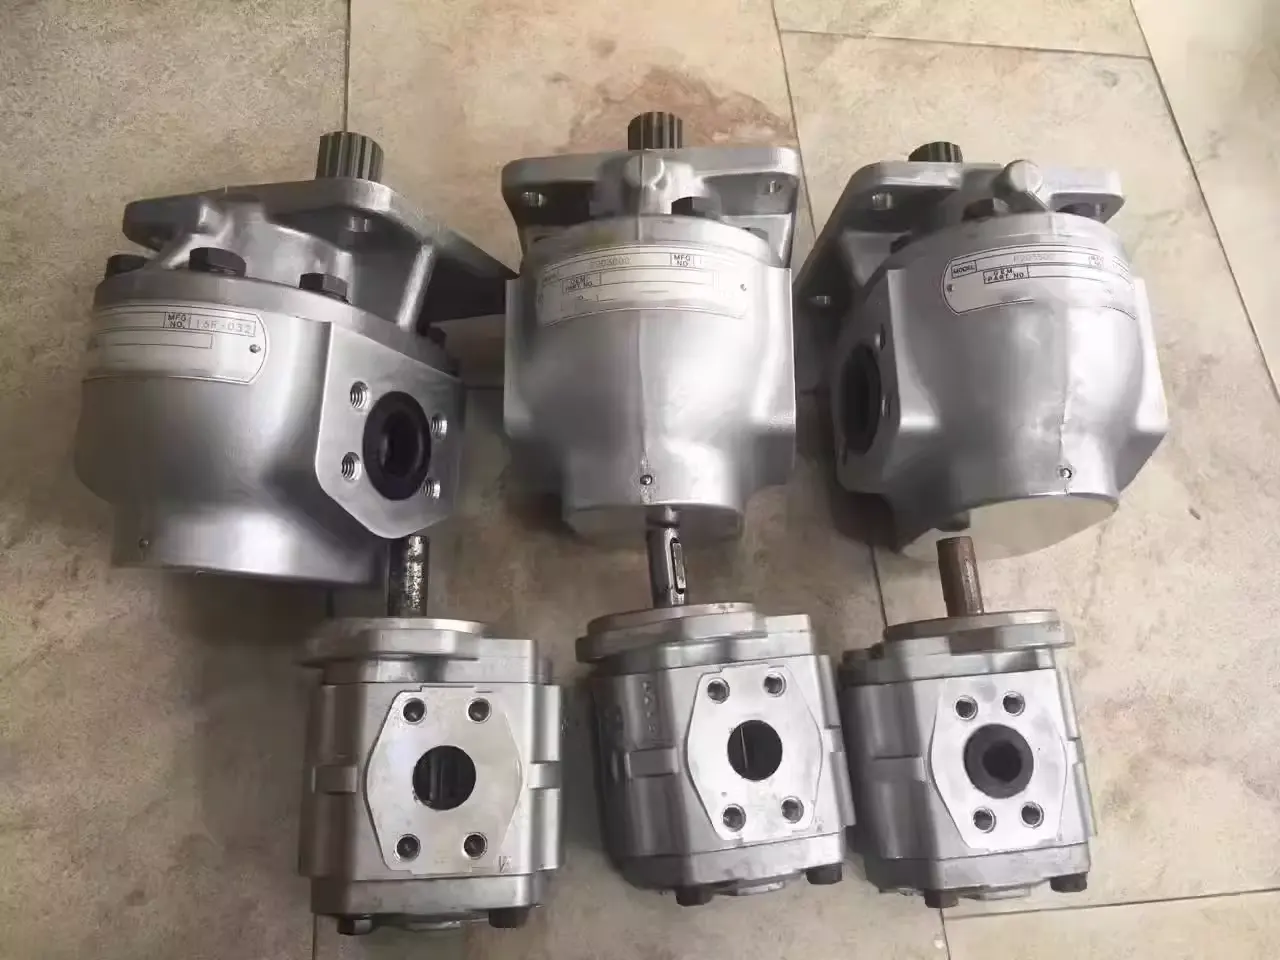 Mitsubishi Factory Directly Gear Pump Forklift Mitsubishi Forklift Hydraulic Pump P20150 P20200 P20300 P20350